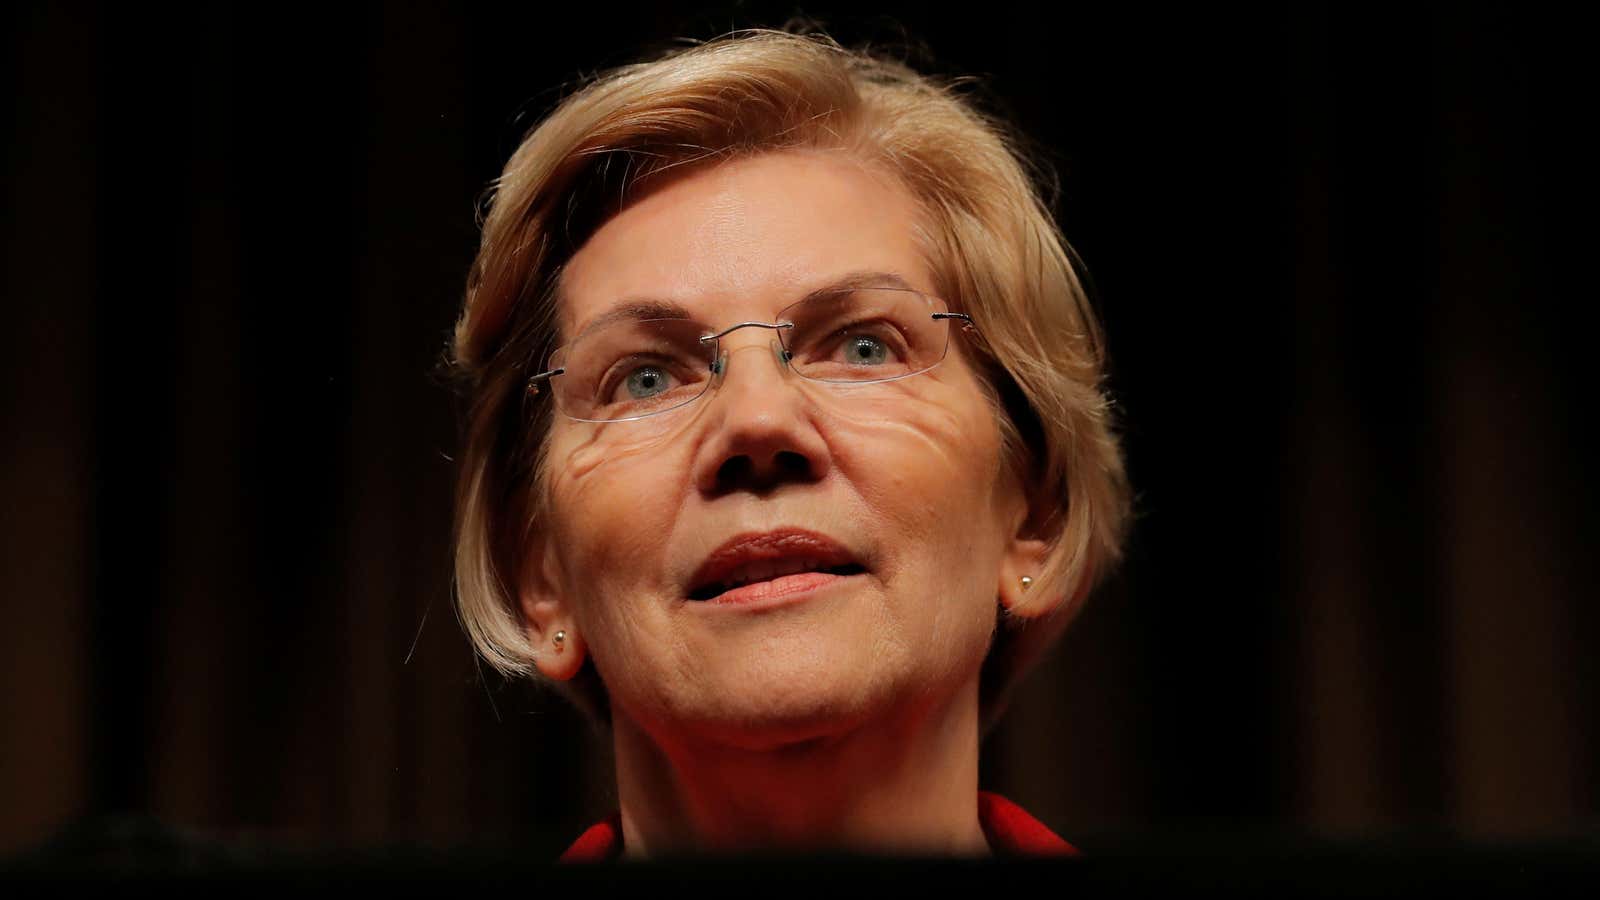 Warren described her plan as a “win-win-win” for “parents, for kids, and for the economy.”